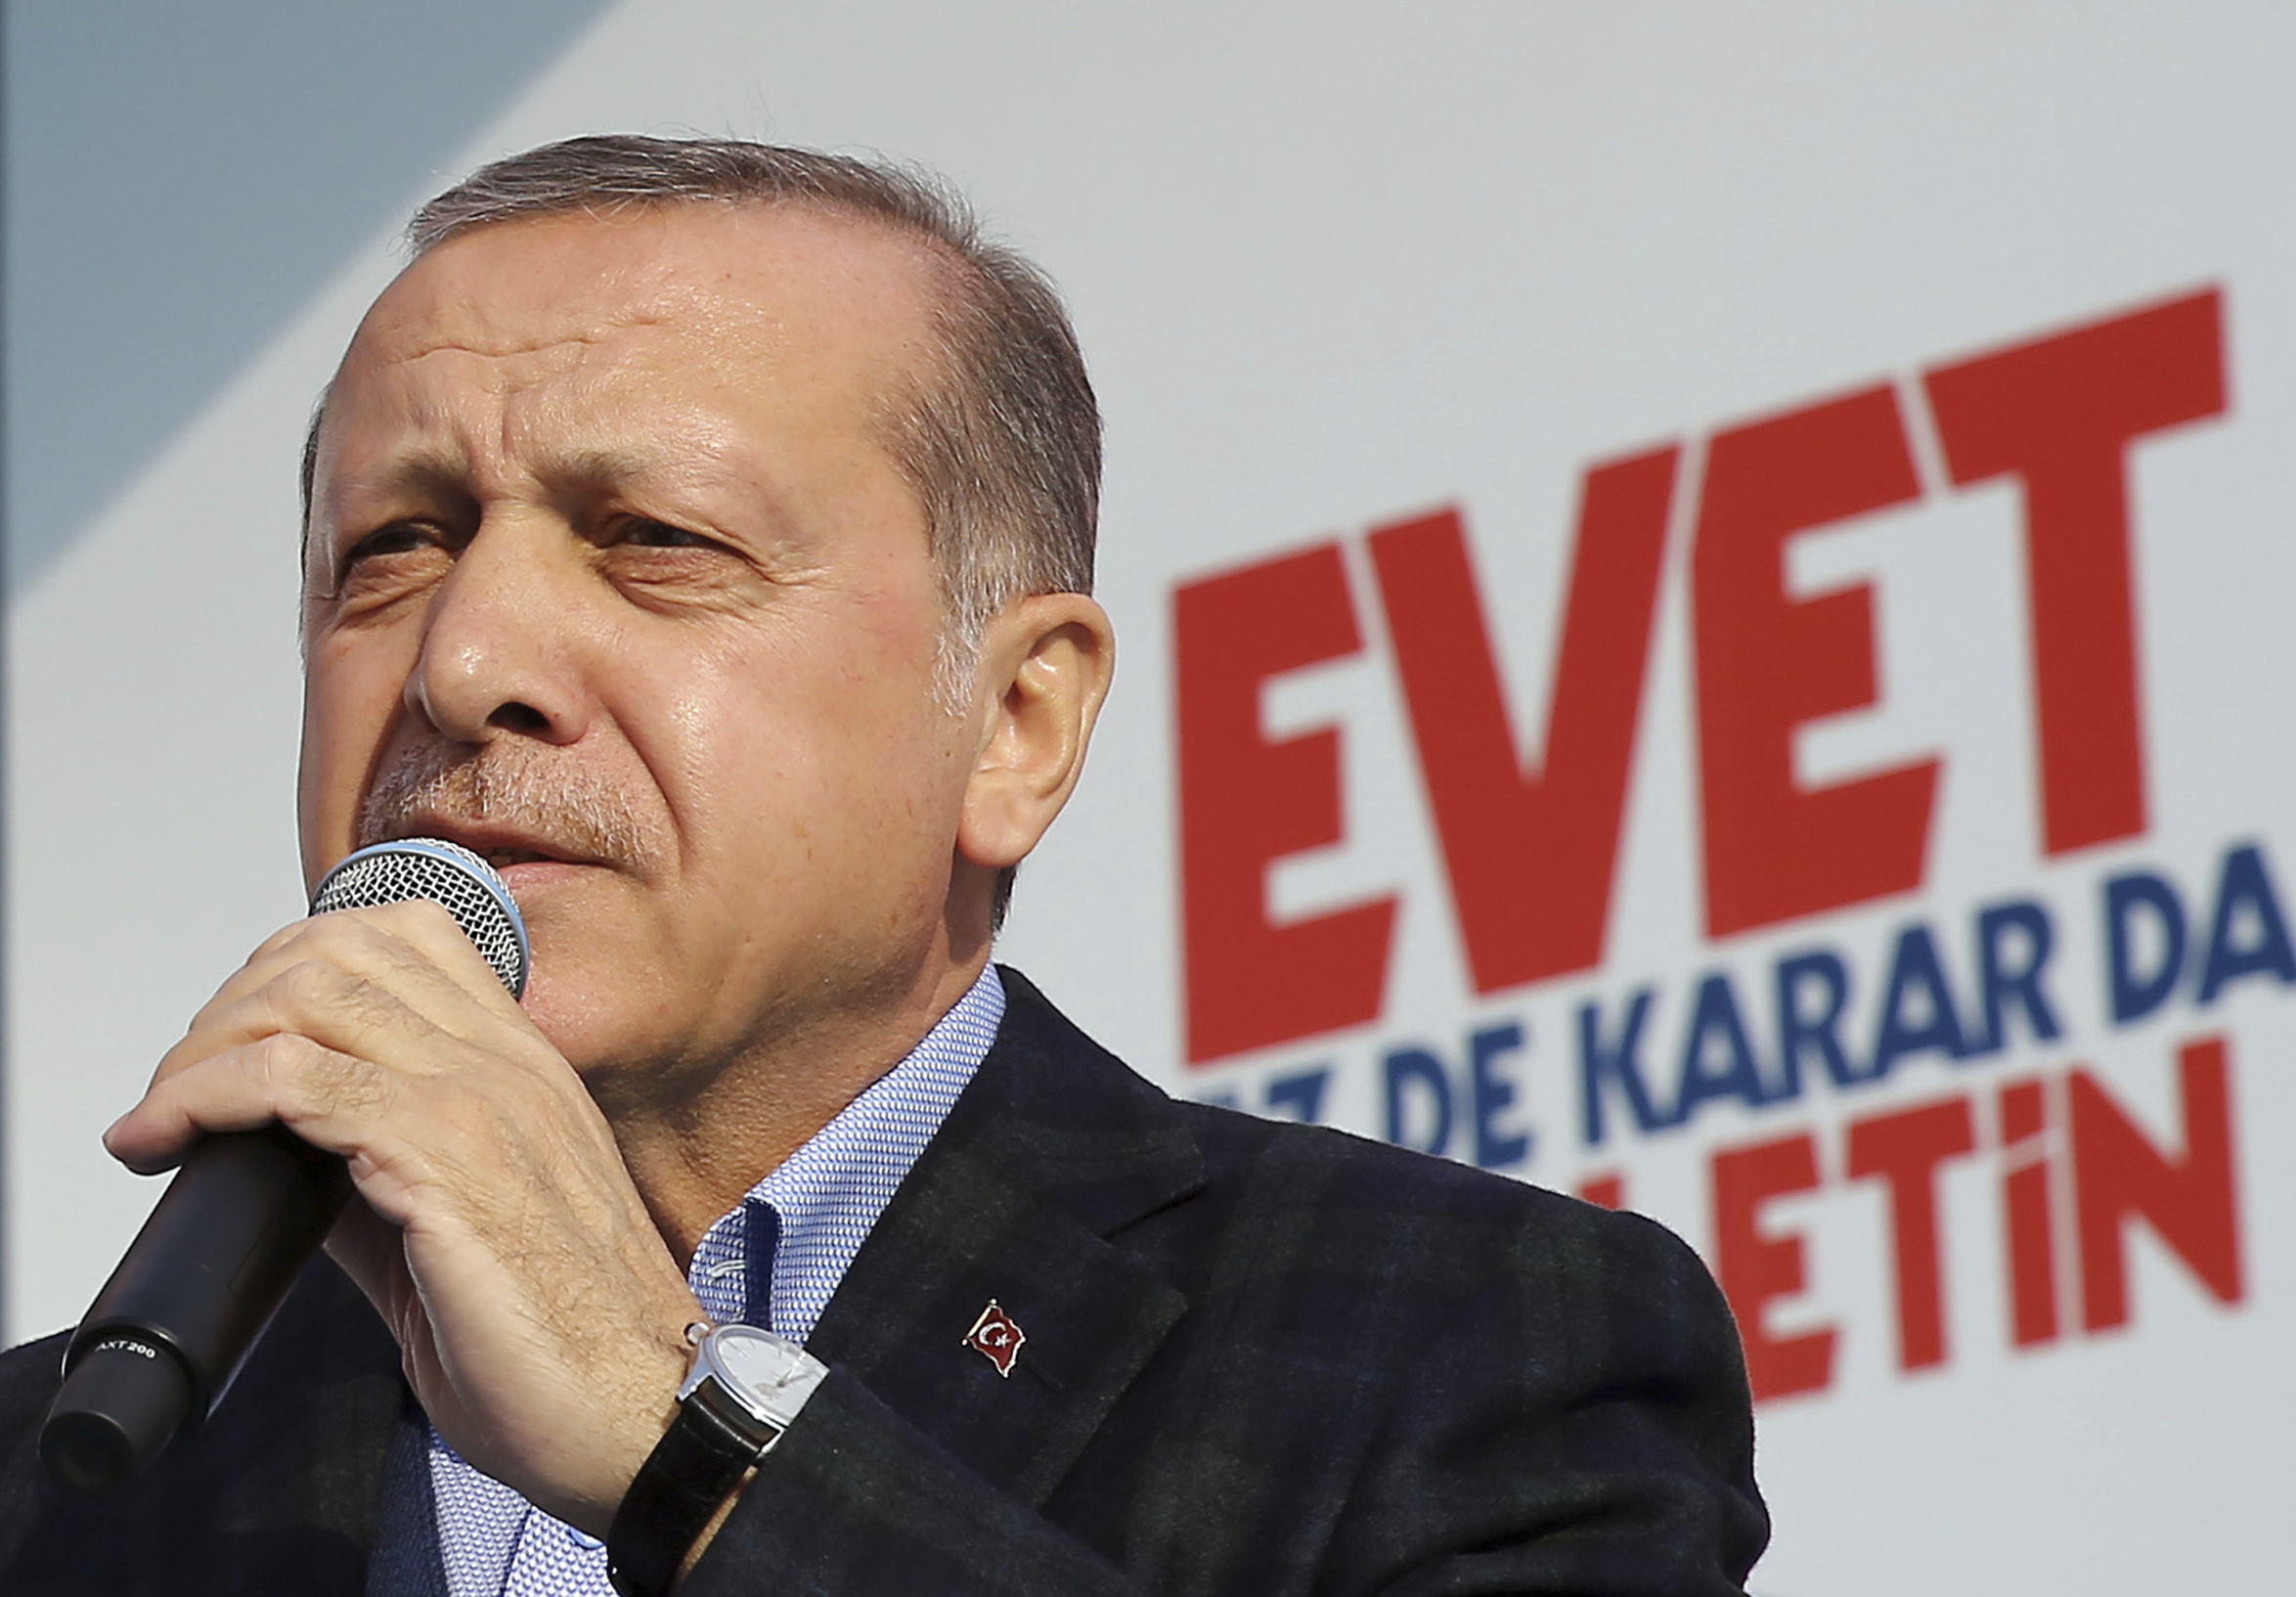 Turkey's President Recep Tayyip Erdogan addresses supporters during a referendum rally in Istanbul, Saturday, April 8, 2017. Turkey is heading to a contentious April 16 referendum on constitutional reforms to expand Erdogan's powers.(Kayhan Ozer/Presidential Press Service, Pool Photo via AP)